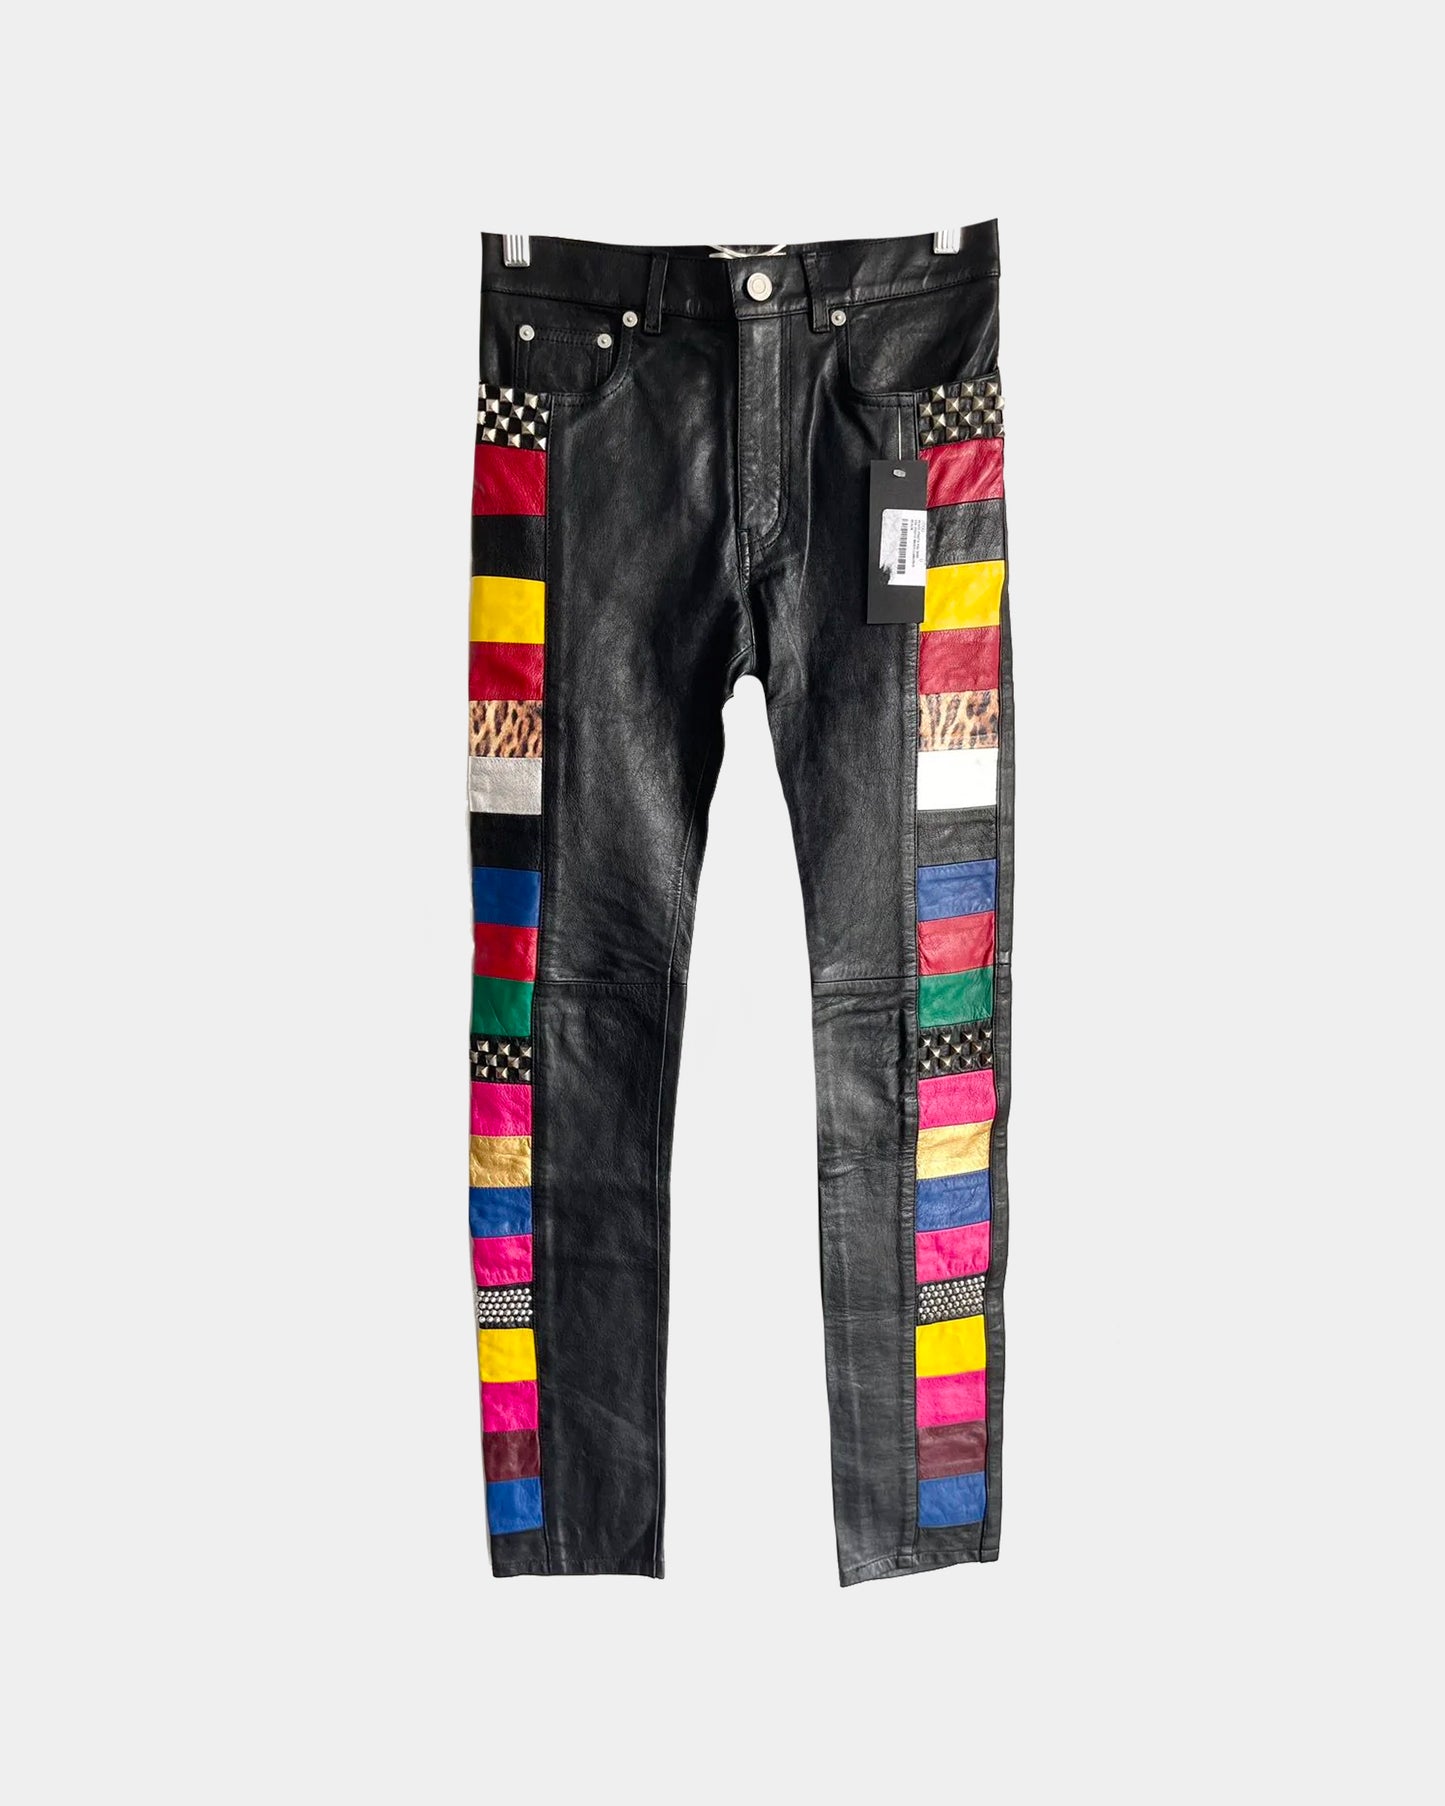 SLP SS16 1 of 1 Sample Proto PATCHWORK LEATHER PANTS JEANS